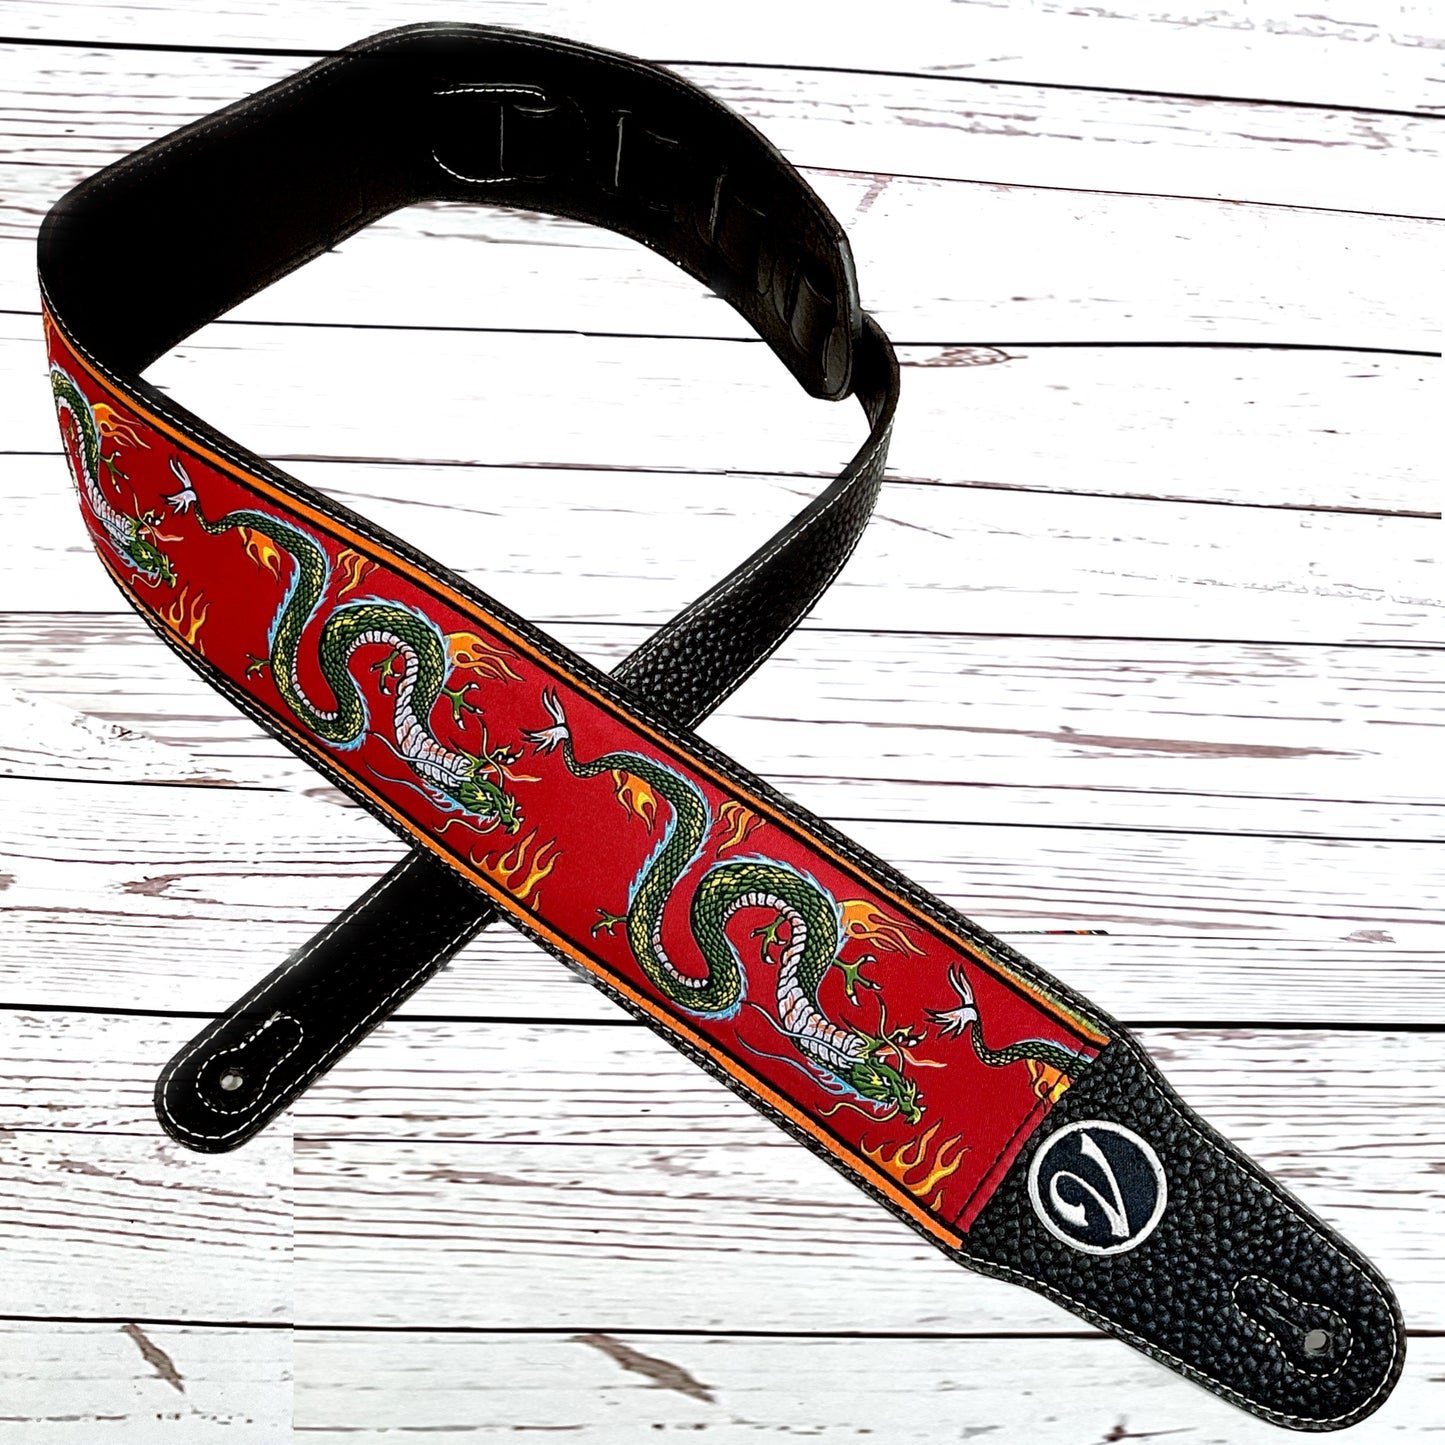 The Jimmy Page Dragon Suit Guitar Strap in Red- Vtar Vegan Guitar Straps